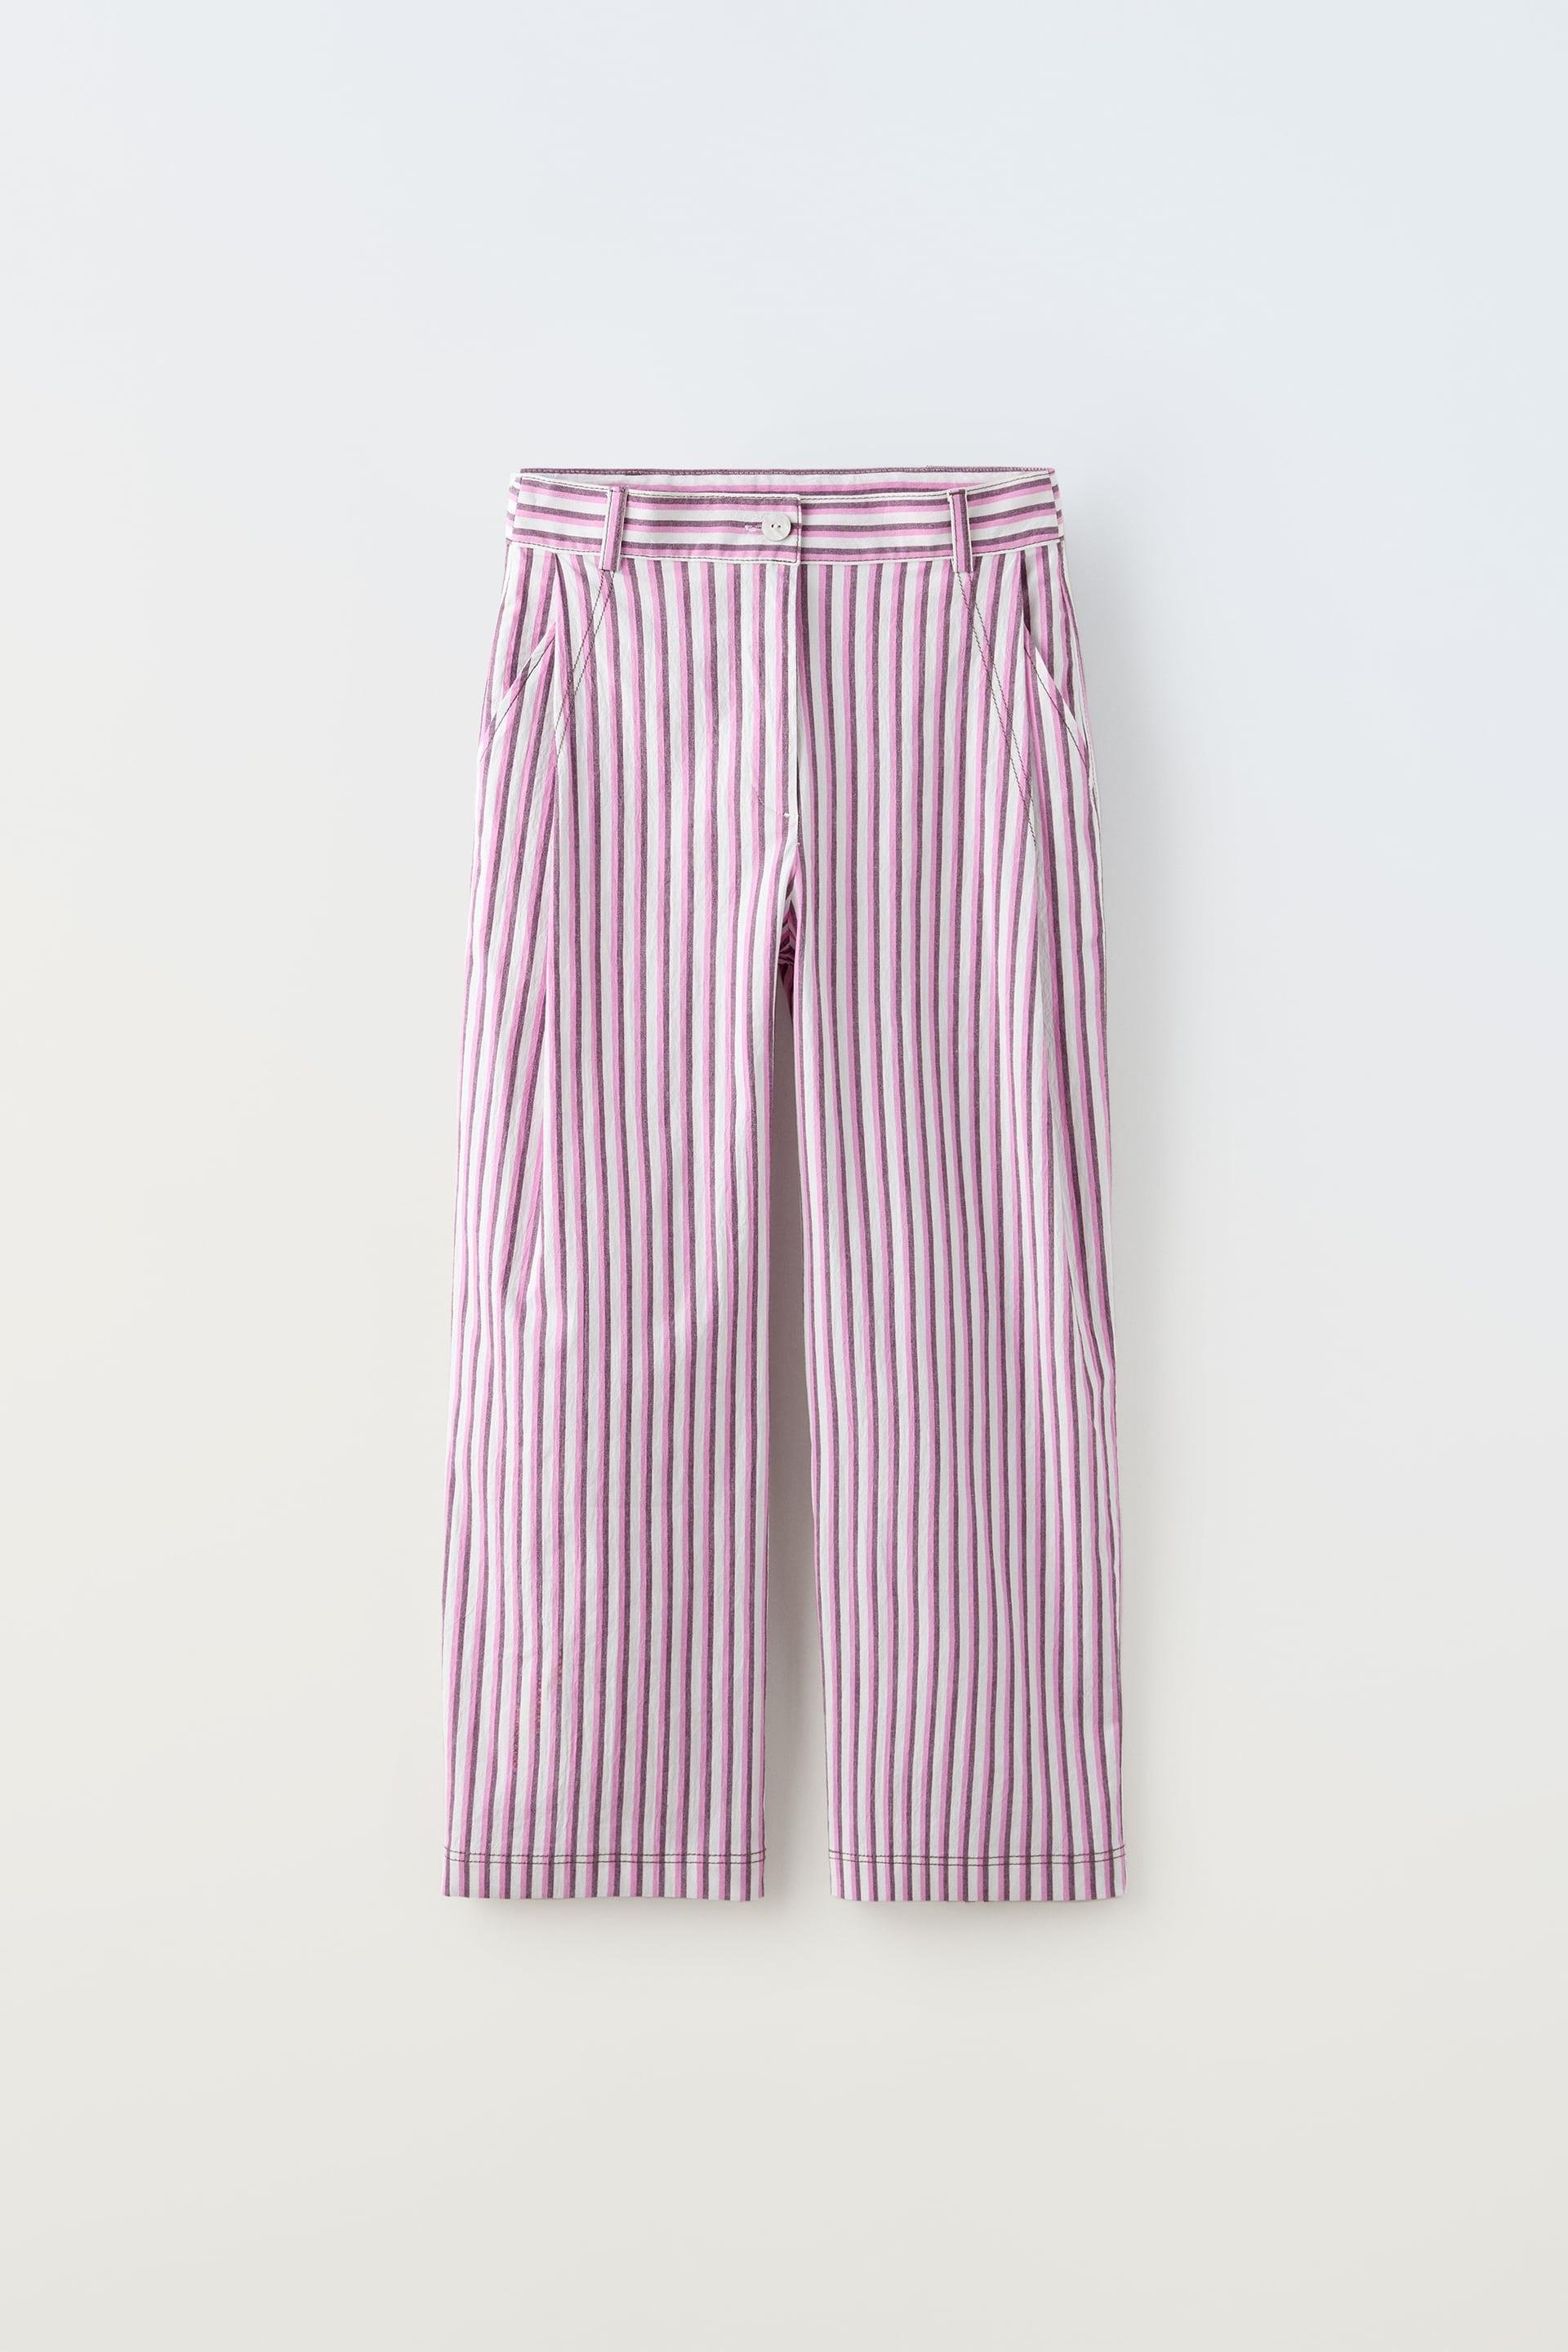 STRIPED PANTS WITH TOPSTITCHING by ZARA